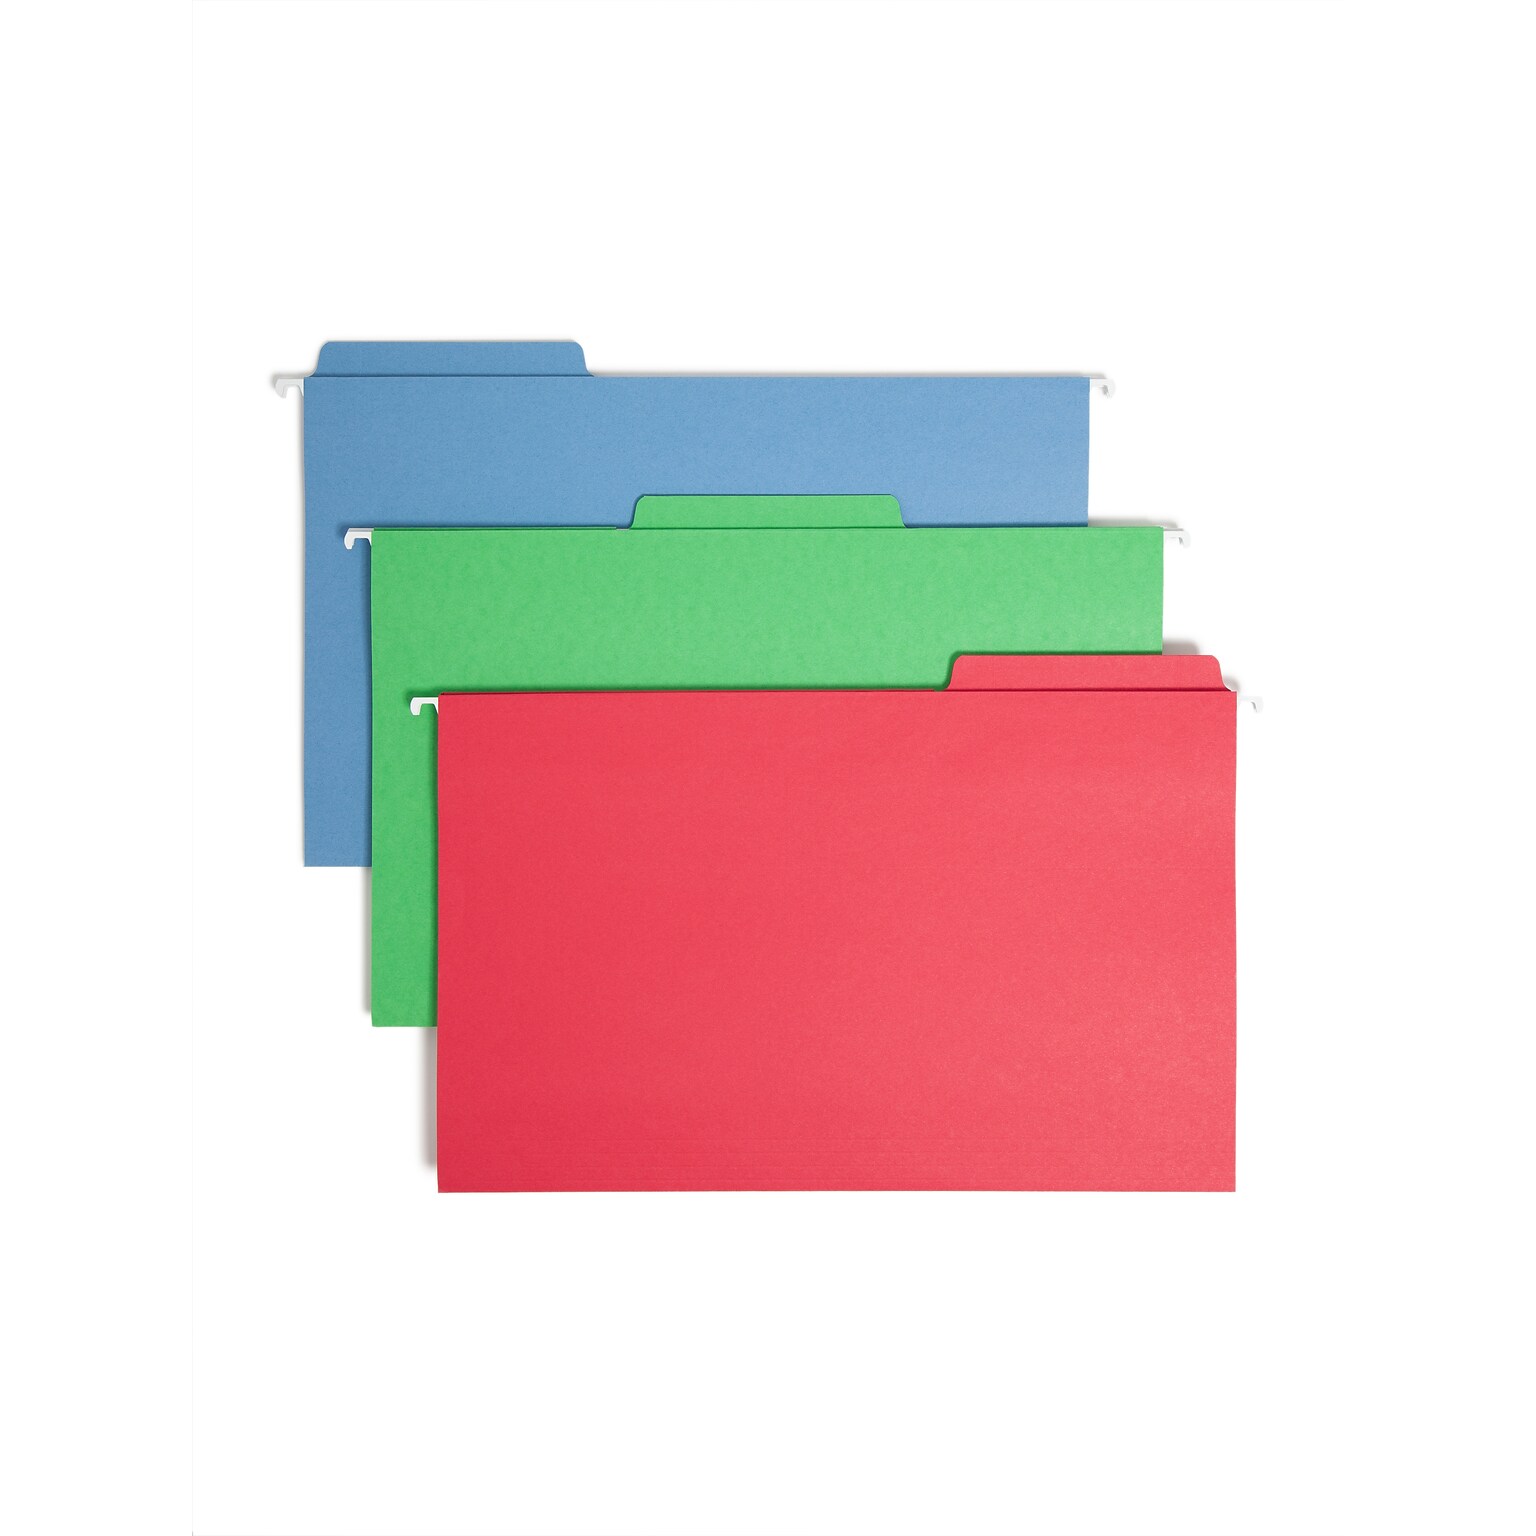 Smead FasTab Reinforced Recycled Hanging File Folder, 3-Tab Tab, Legal Size, Assorted Colors, 18/Box (64153)